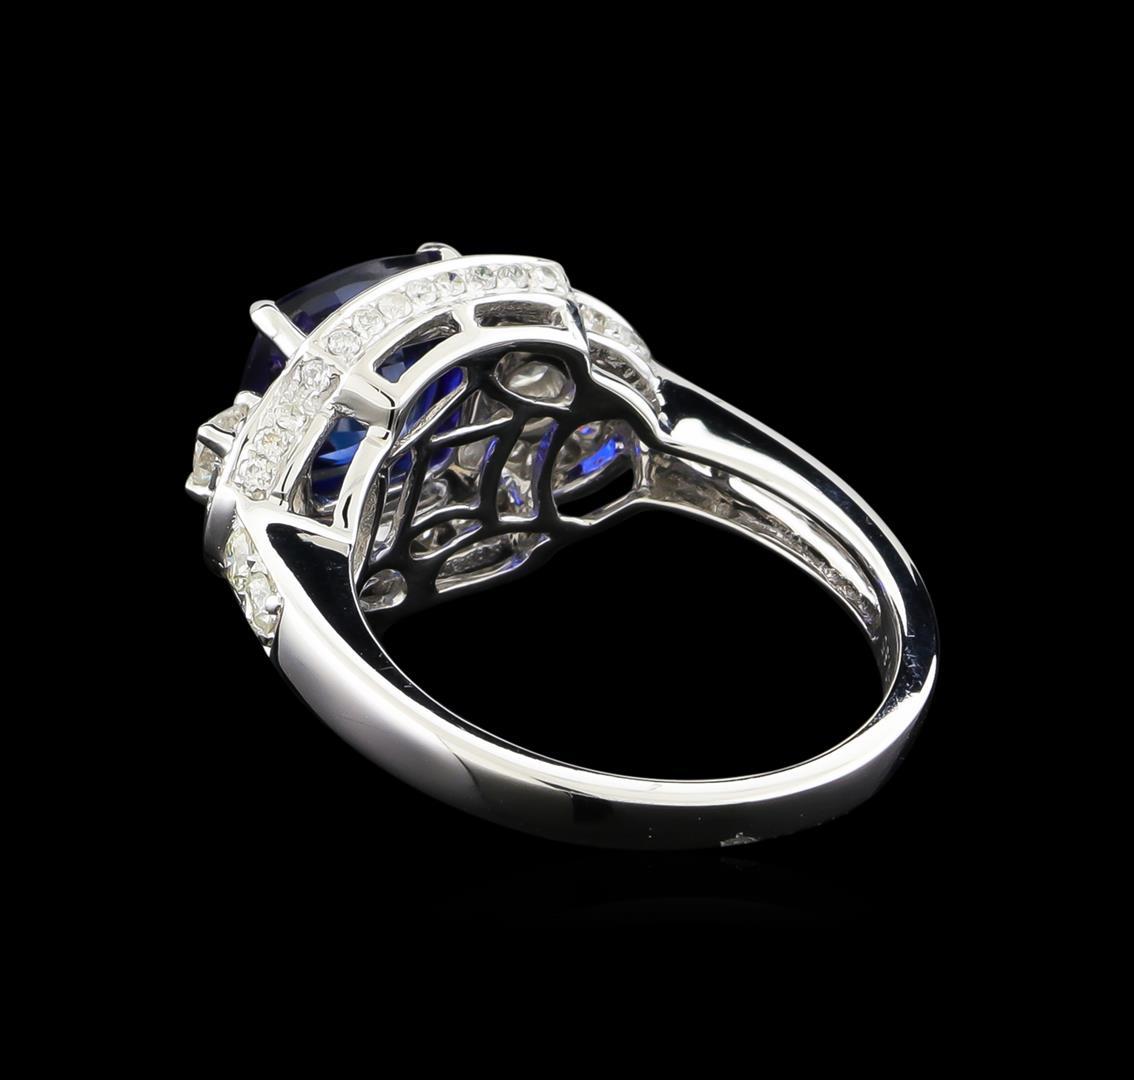 14KT White Gold 2.58 ctw Sapphire and Diamond Ring